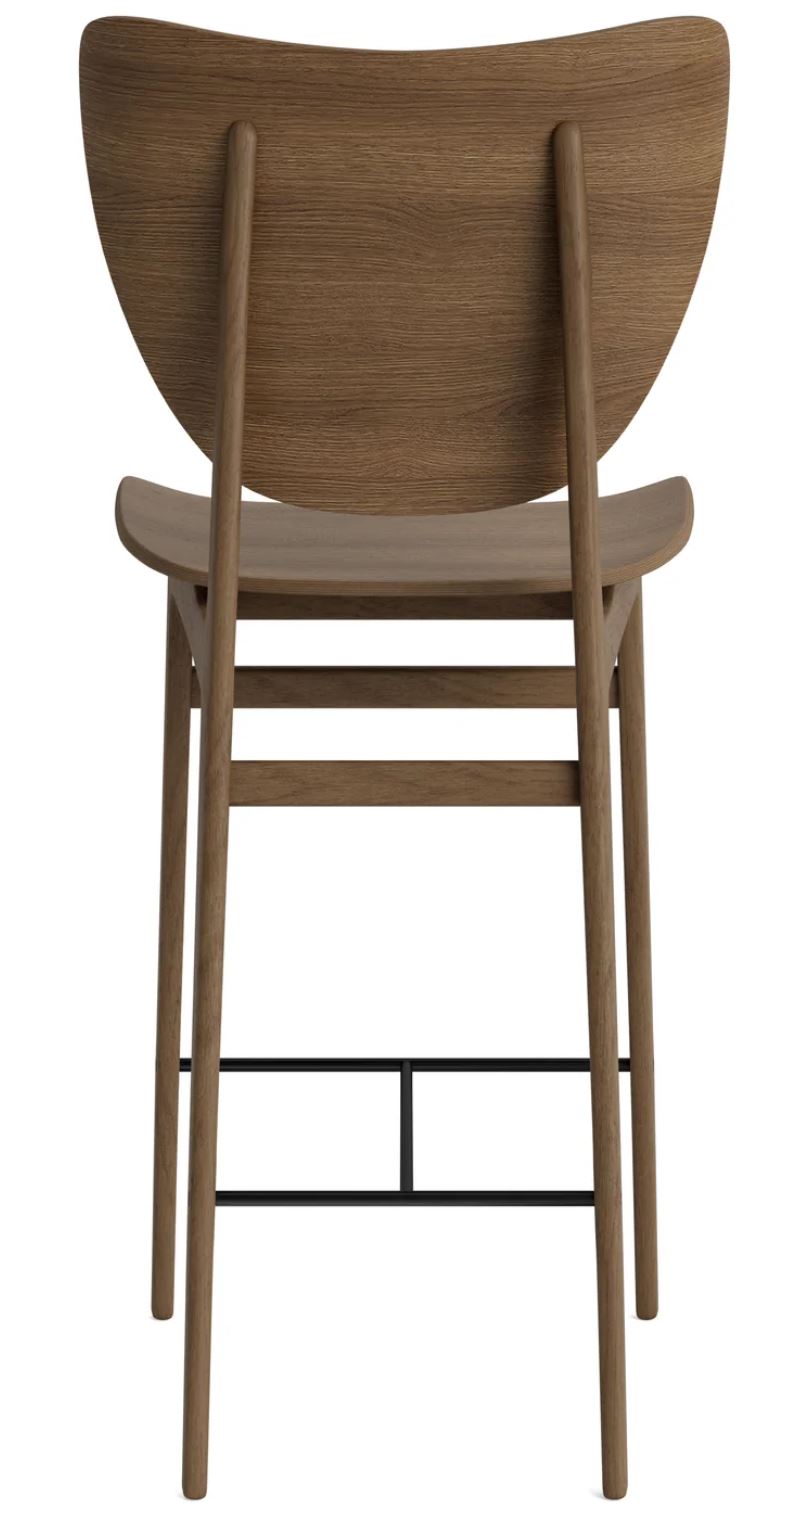 ELEPHANT BAR CHAIR UN-UPHOLSTERED BY NORR11 $2,150.00